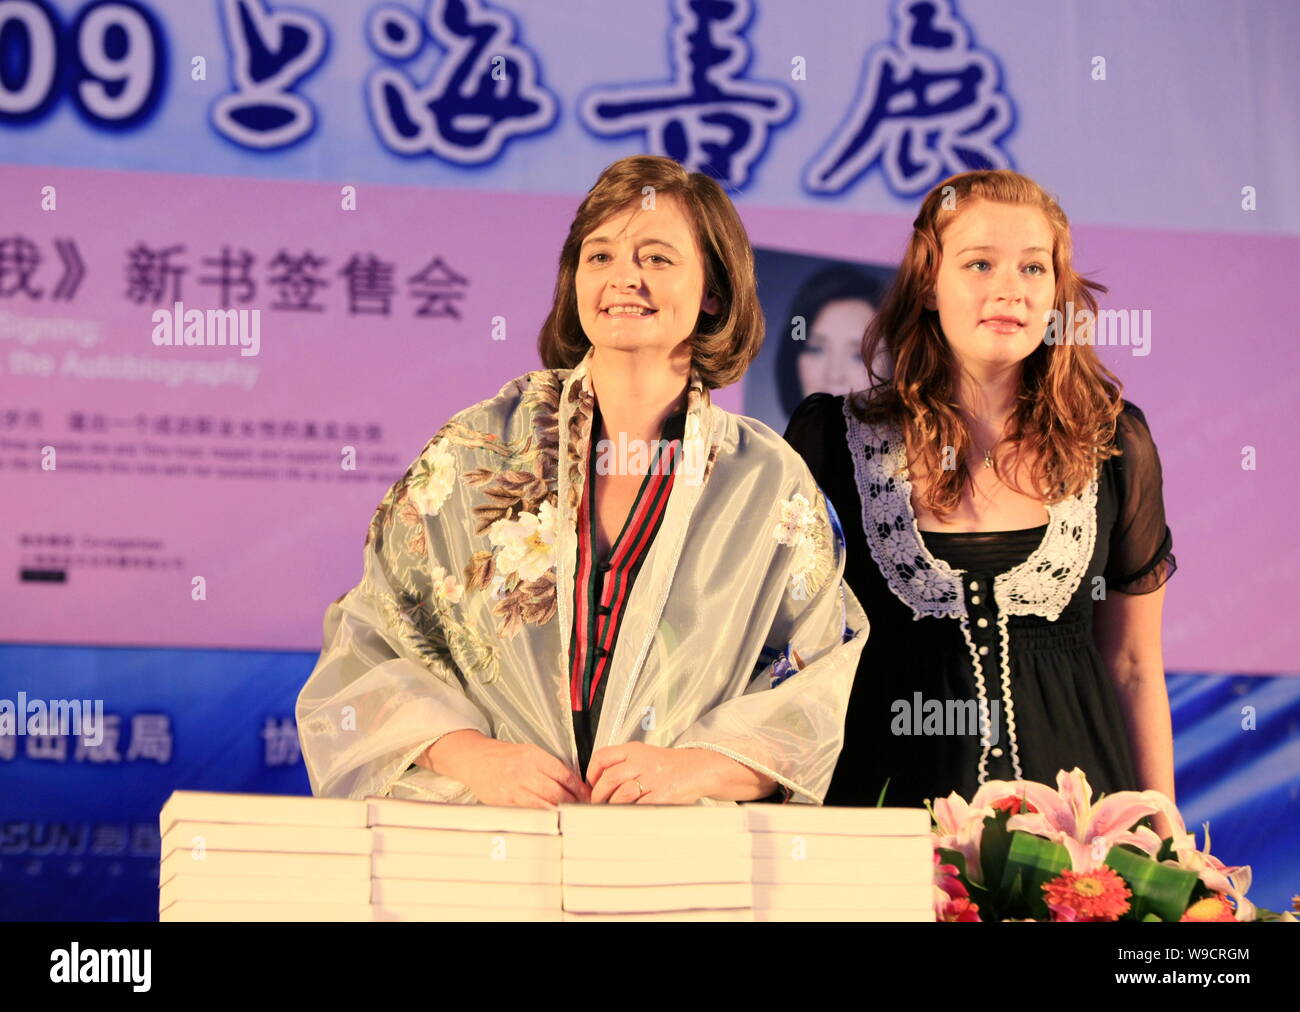 Cherie Blair (L), wife of former-British PM Tony Blair, and her daughter Kathryn Blair, are seen during a book signing event to promote the Chinese ed Stock Photo